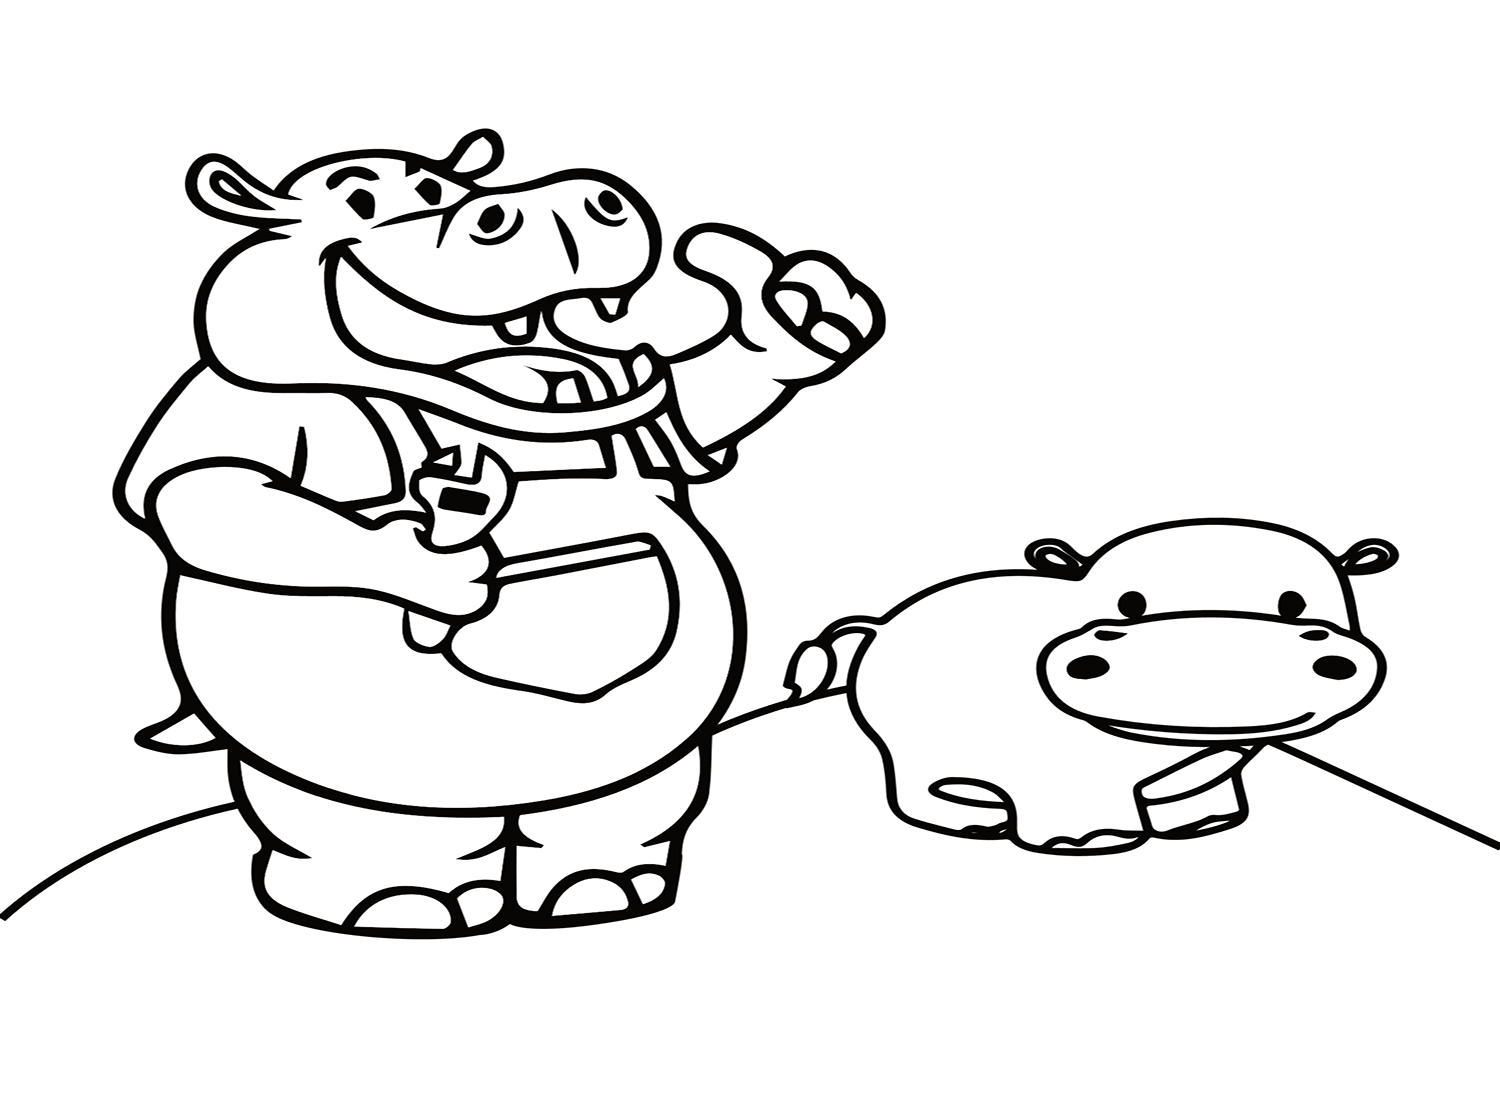 Hippo with Wrench Coloring Page